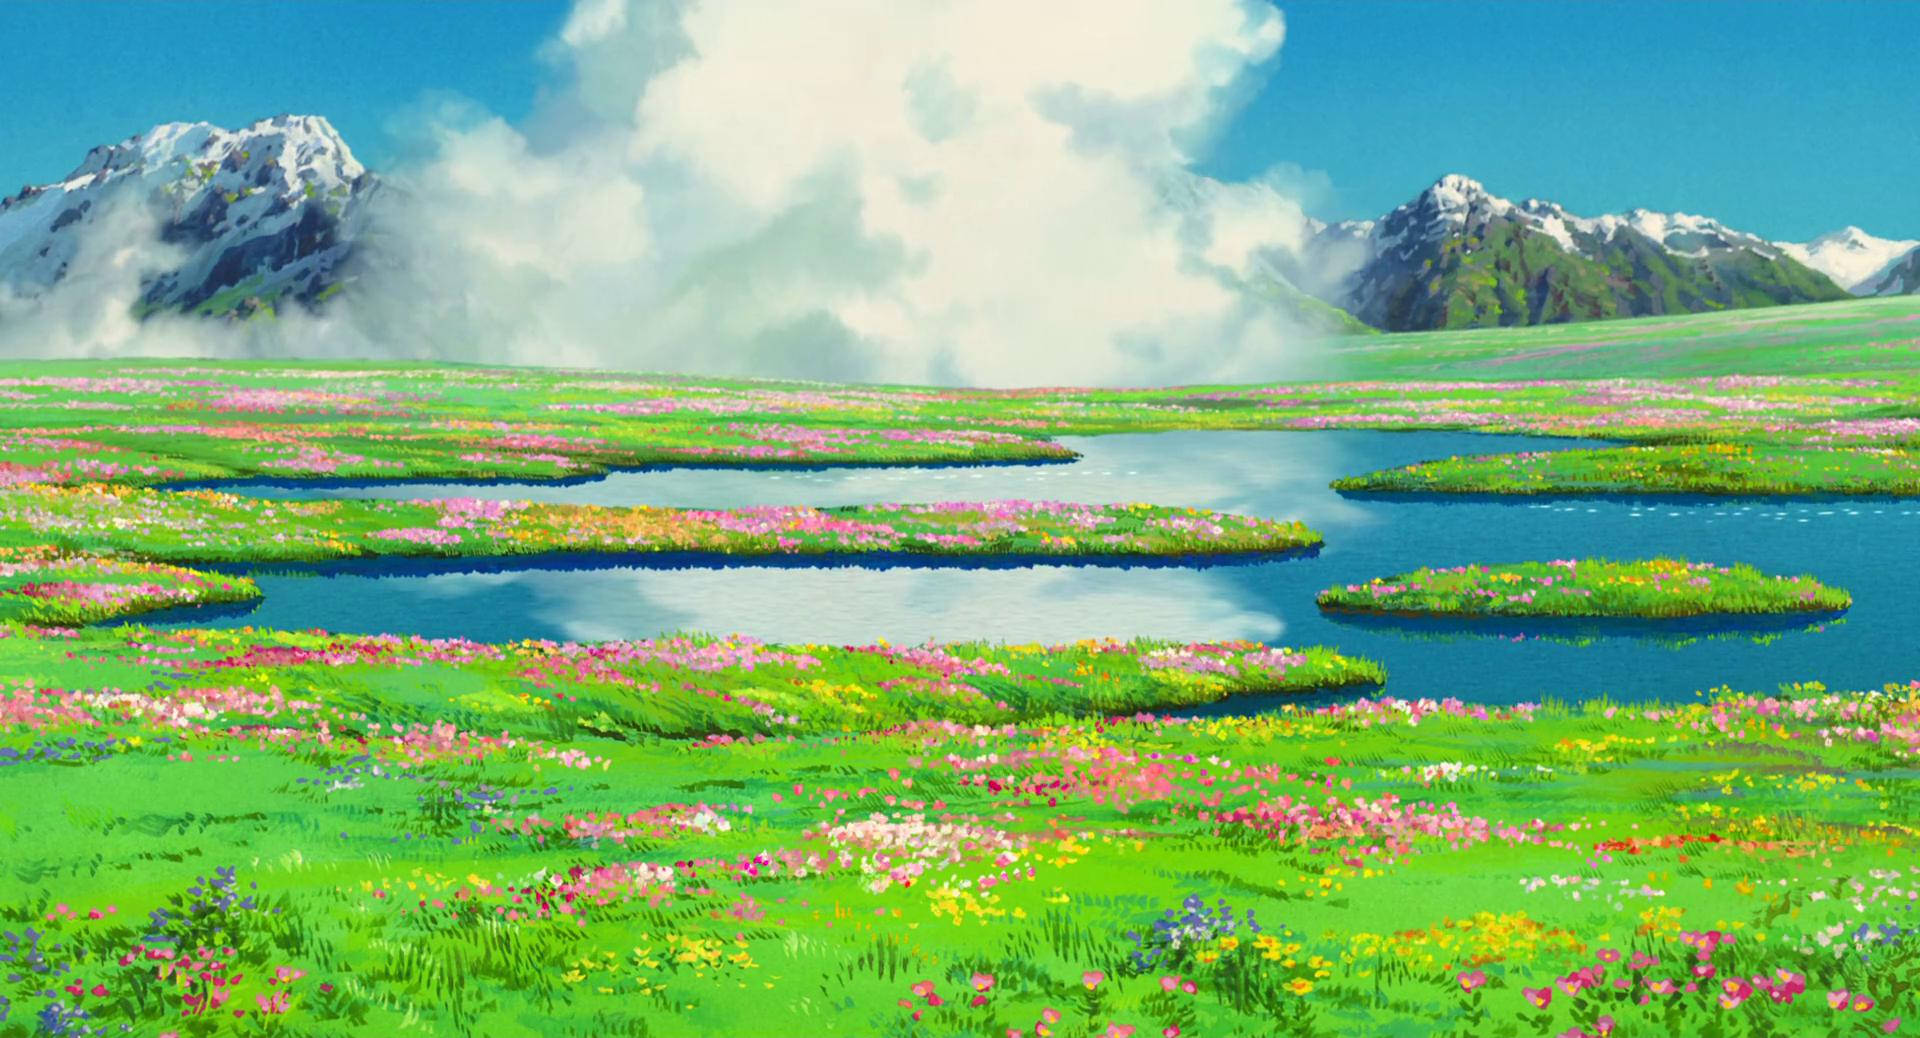 Find yourself in a world of adventure at Studio Ghibli's Howl's Garden Wallpaper